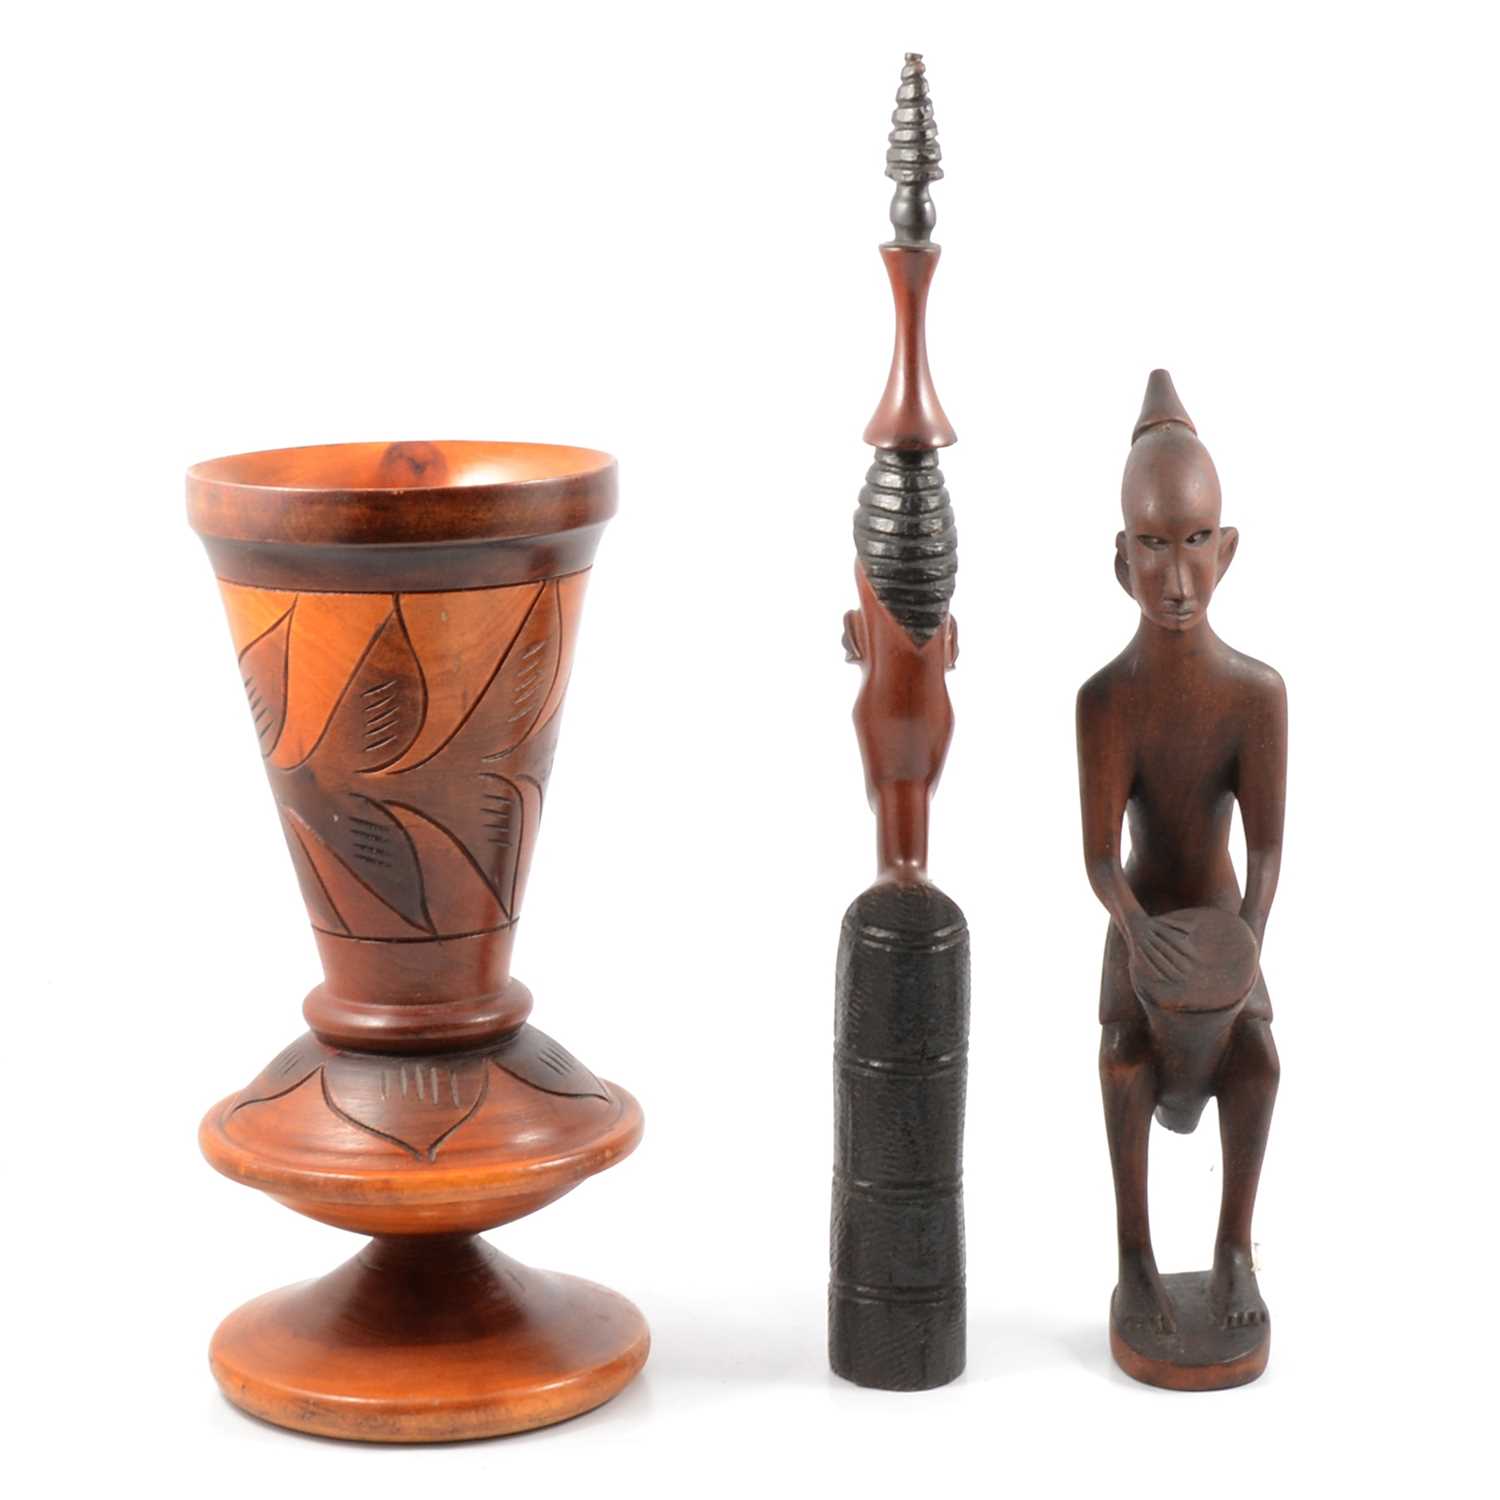 Lot 161 - A quantity of carved wooden idols, vessels and other treen